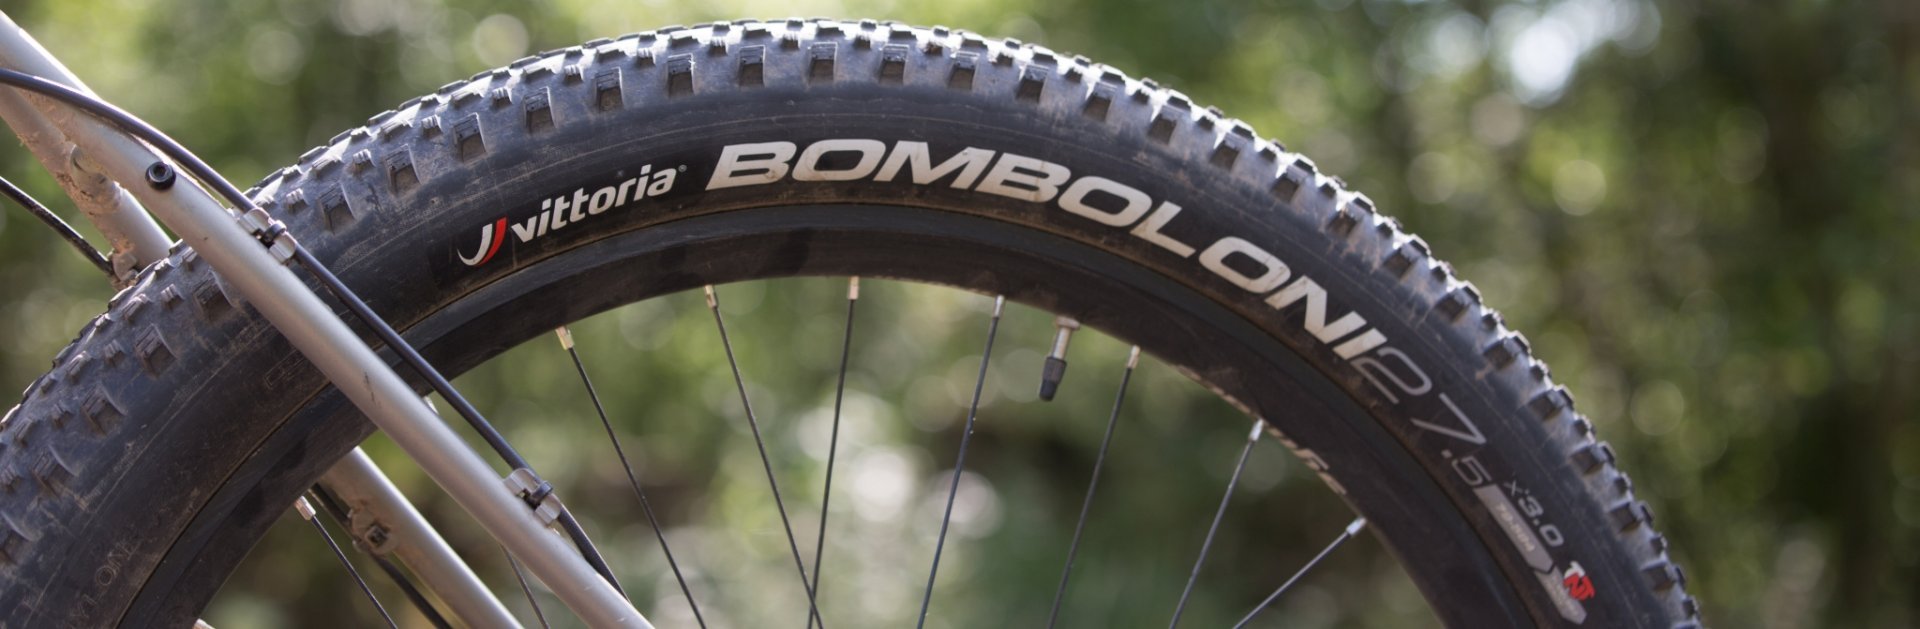 The Vittoria Bomboloni tyres are super wide and offer the prefect amount of grip.